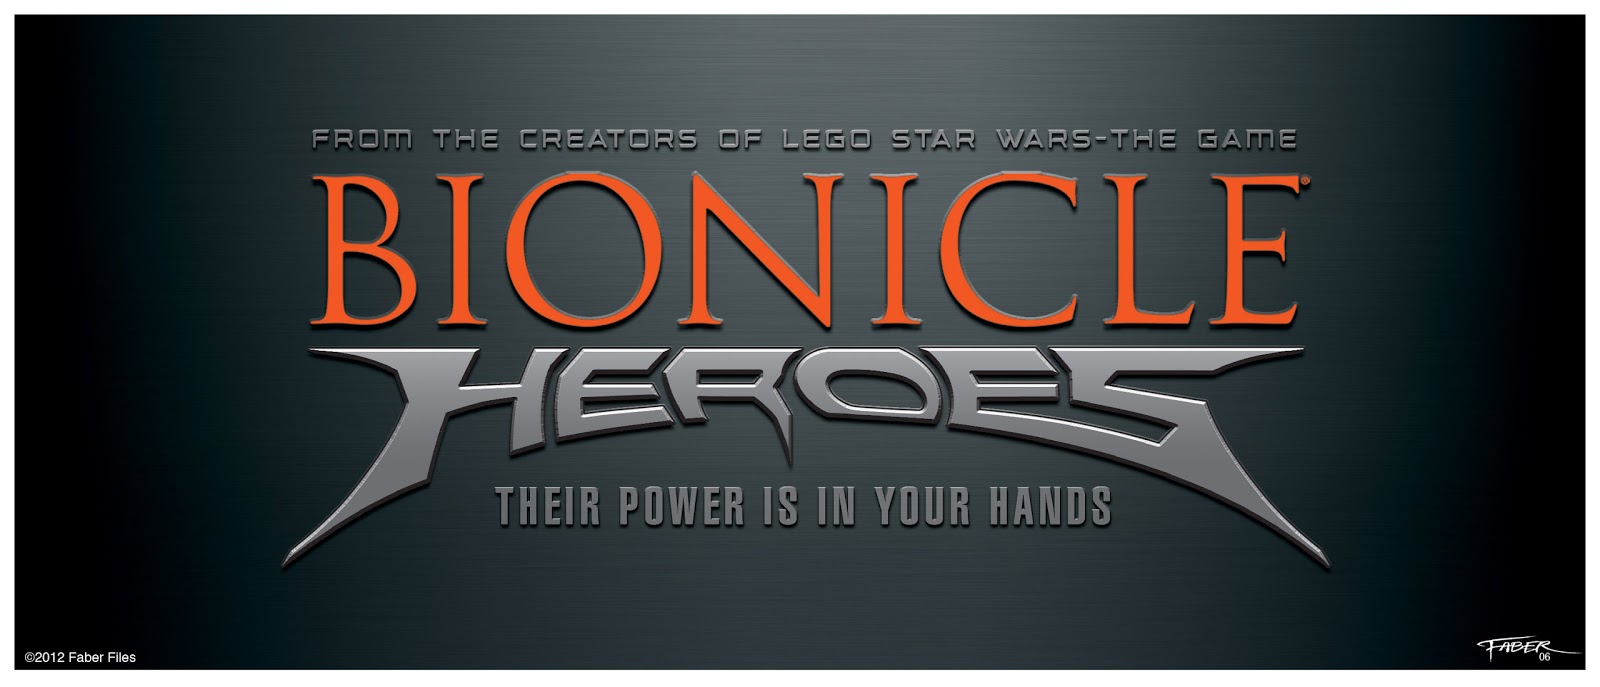 Bionicle Concept Arts - Página 3 Christian+Faber+Files_Bionicle+Heroes+logo